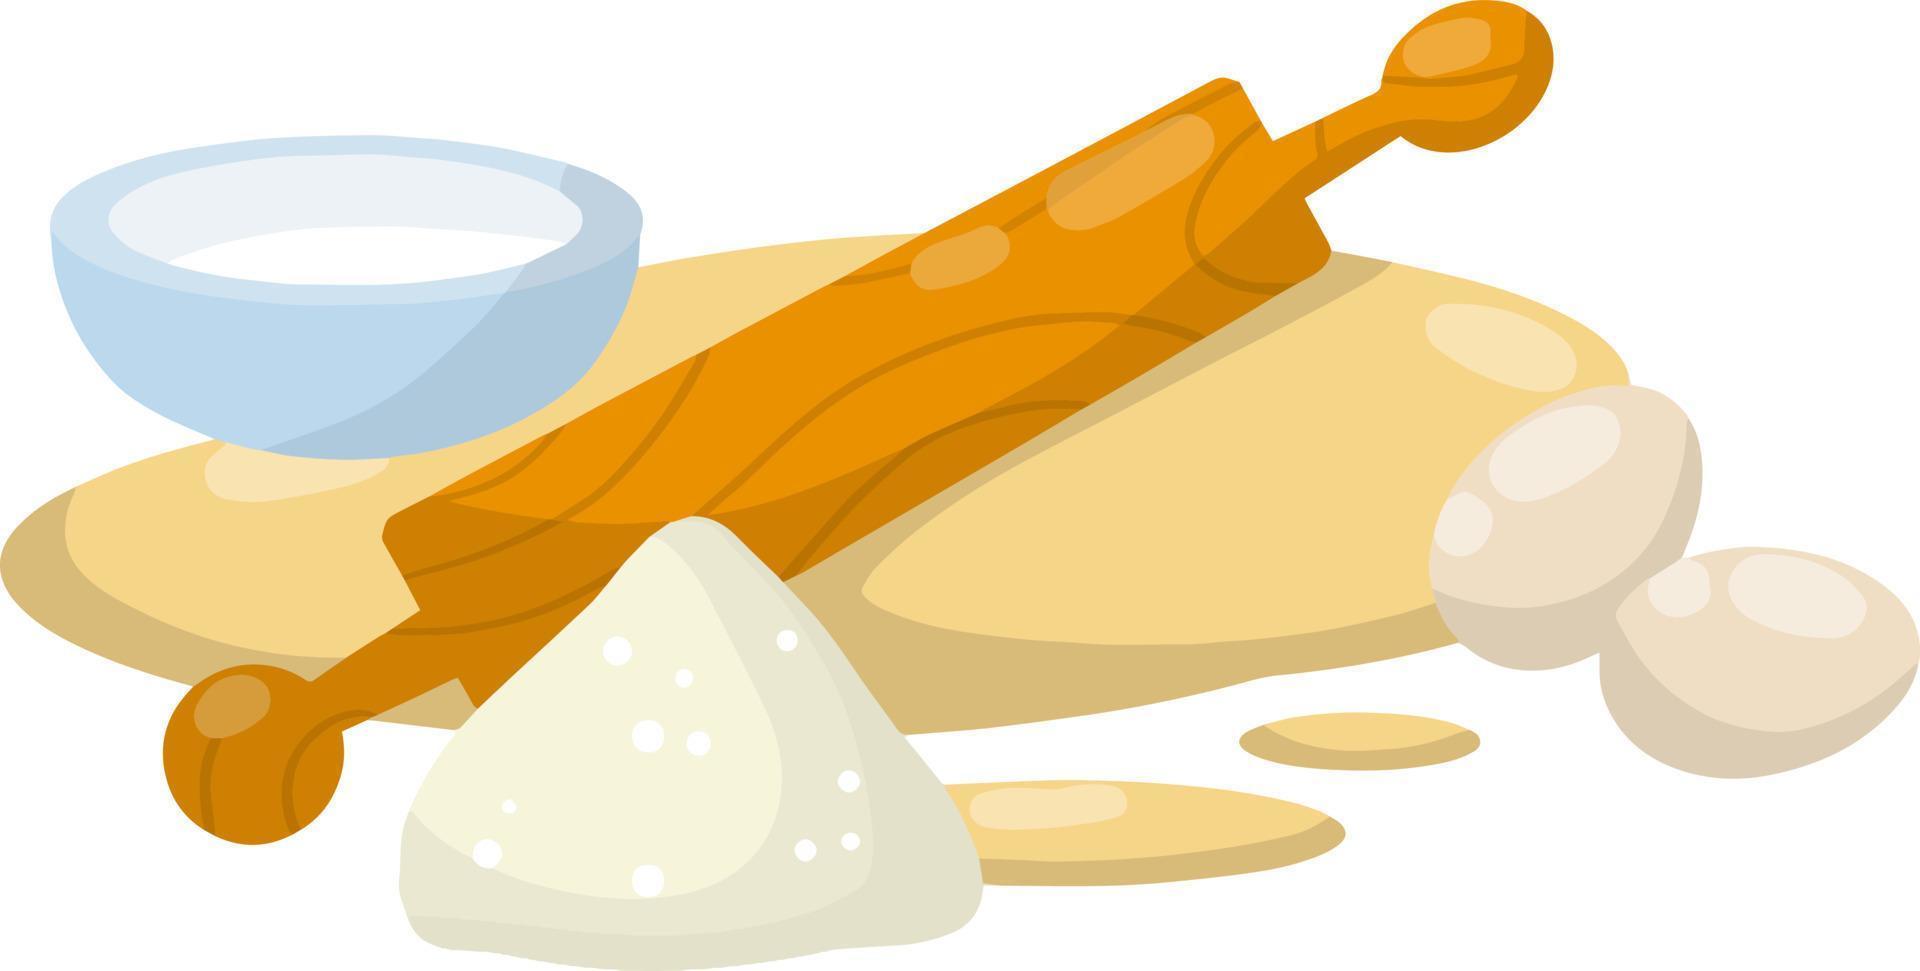 Rolling pin and dough. Wooden appliance for kitchen and cooking. Cartoon flat illustration. Preparation of bread and pastries. Set of Ingredients-flour, milk, egg. Kneading dough vector